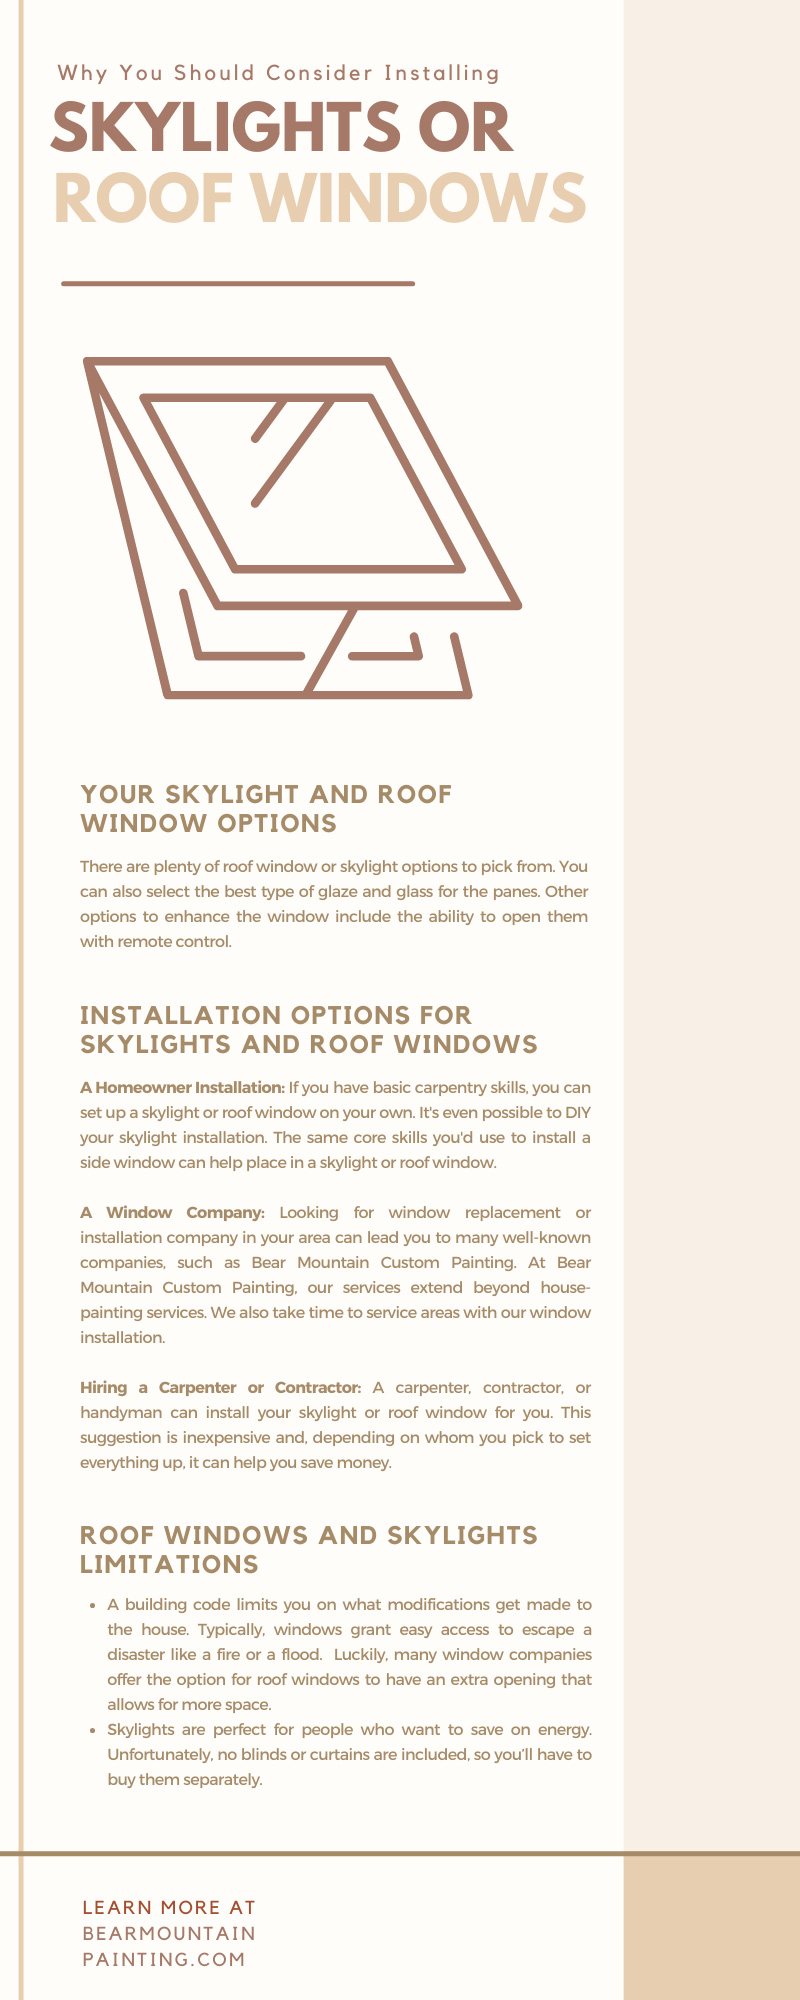 Why You Should Consider Installing Skylights or Roof Windows
